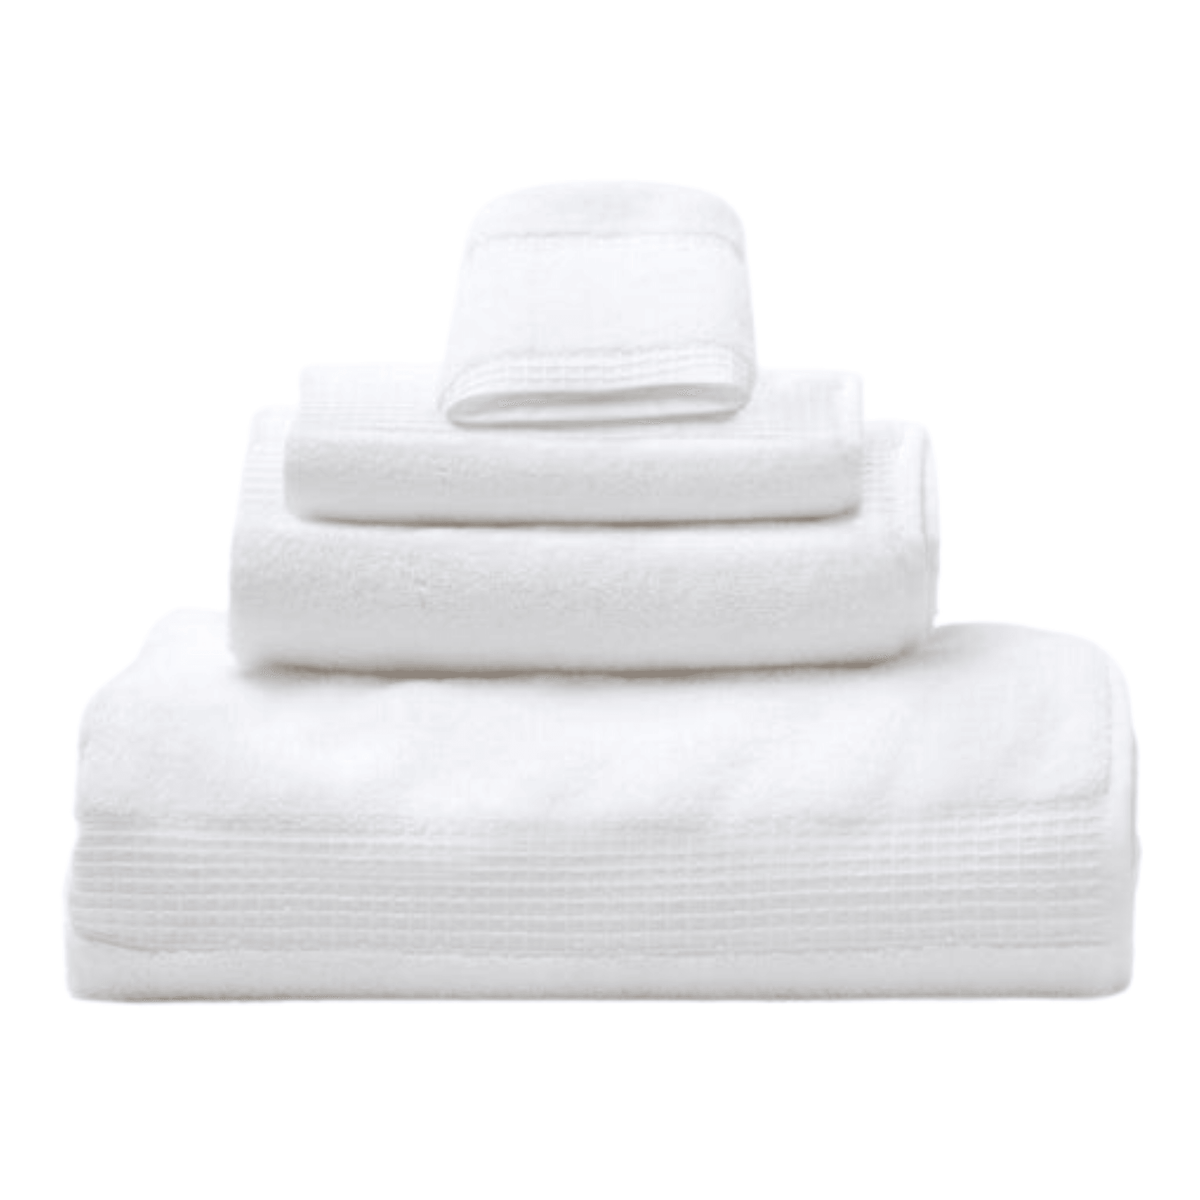 http://www.wellappointedhouse.com/cdn/shop/files/pigeon-and-poodle-annecy-plush-cotton-towel-set-in-white-bath-towels-the-well-appointed-house-1_f53ad91e-855c-4fc2-9156-1bcb28b5bbe0_1200x1200.png?v=1691660974